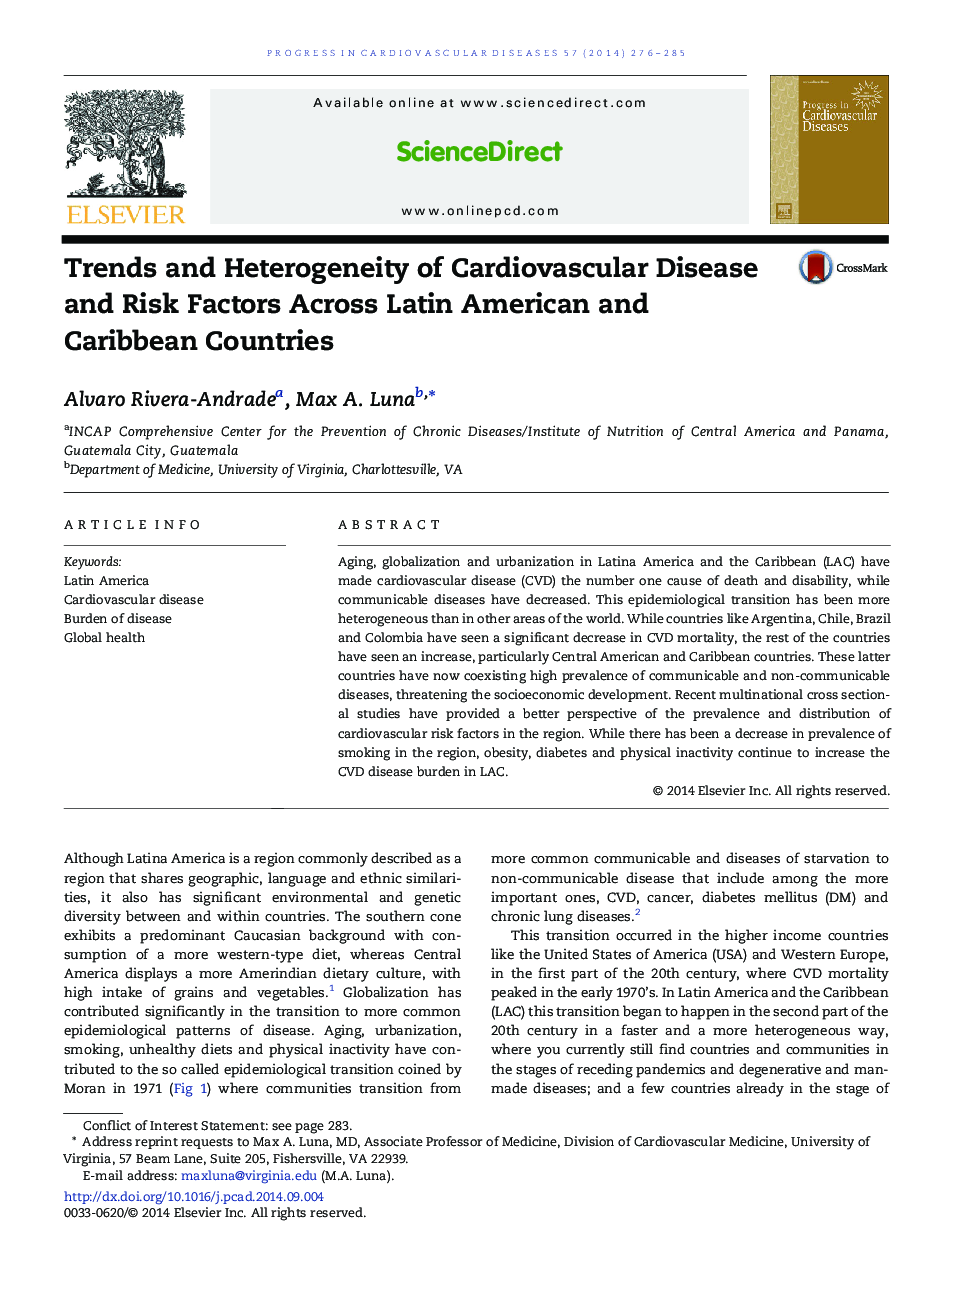 Trends and Heterogeneity of Cardiovascular Disease and Risk Factors Across Latin American and Caribbean Countries 